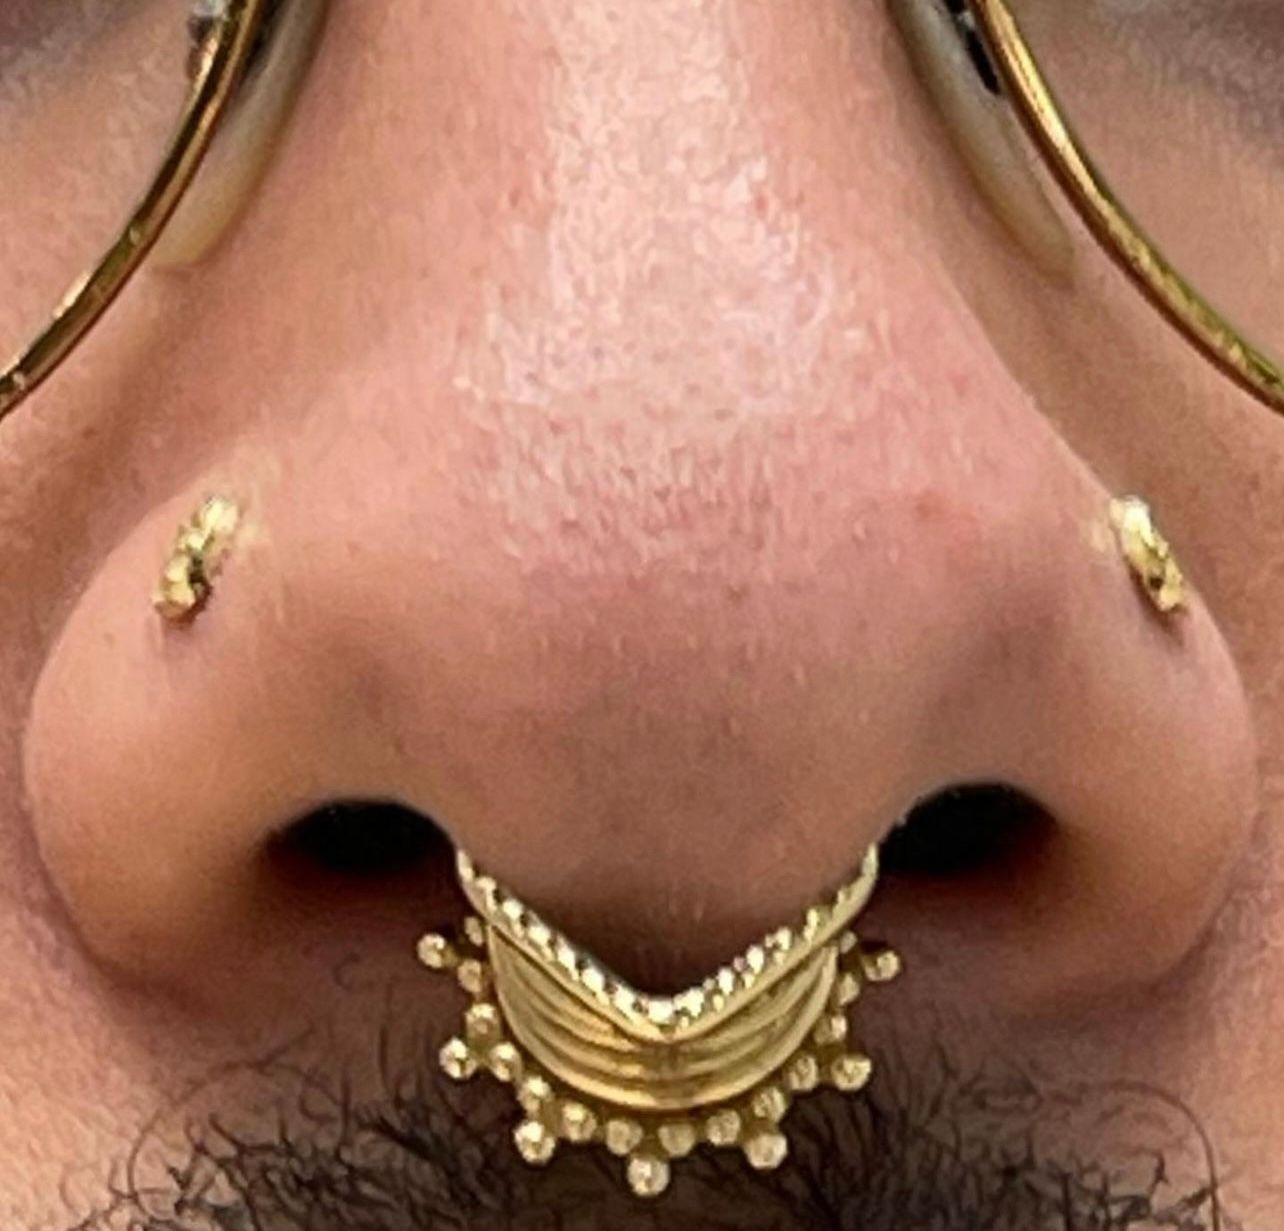 a close up of a person 's nose with a nose ring